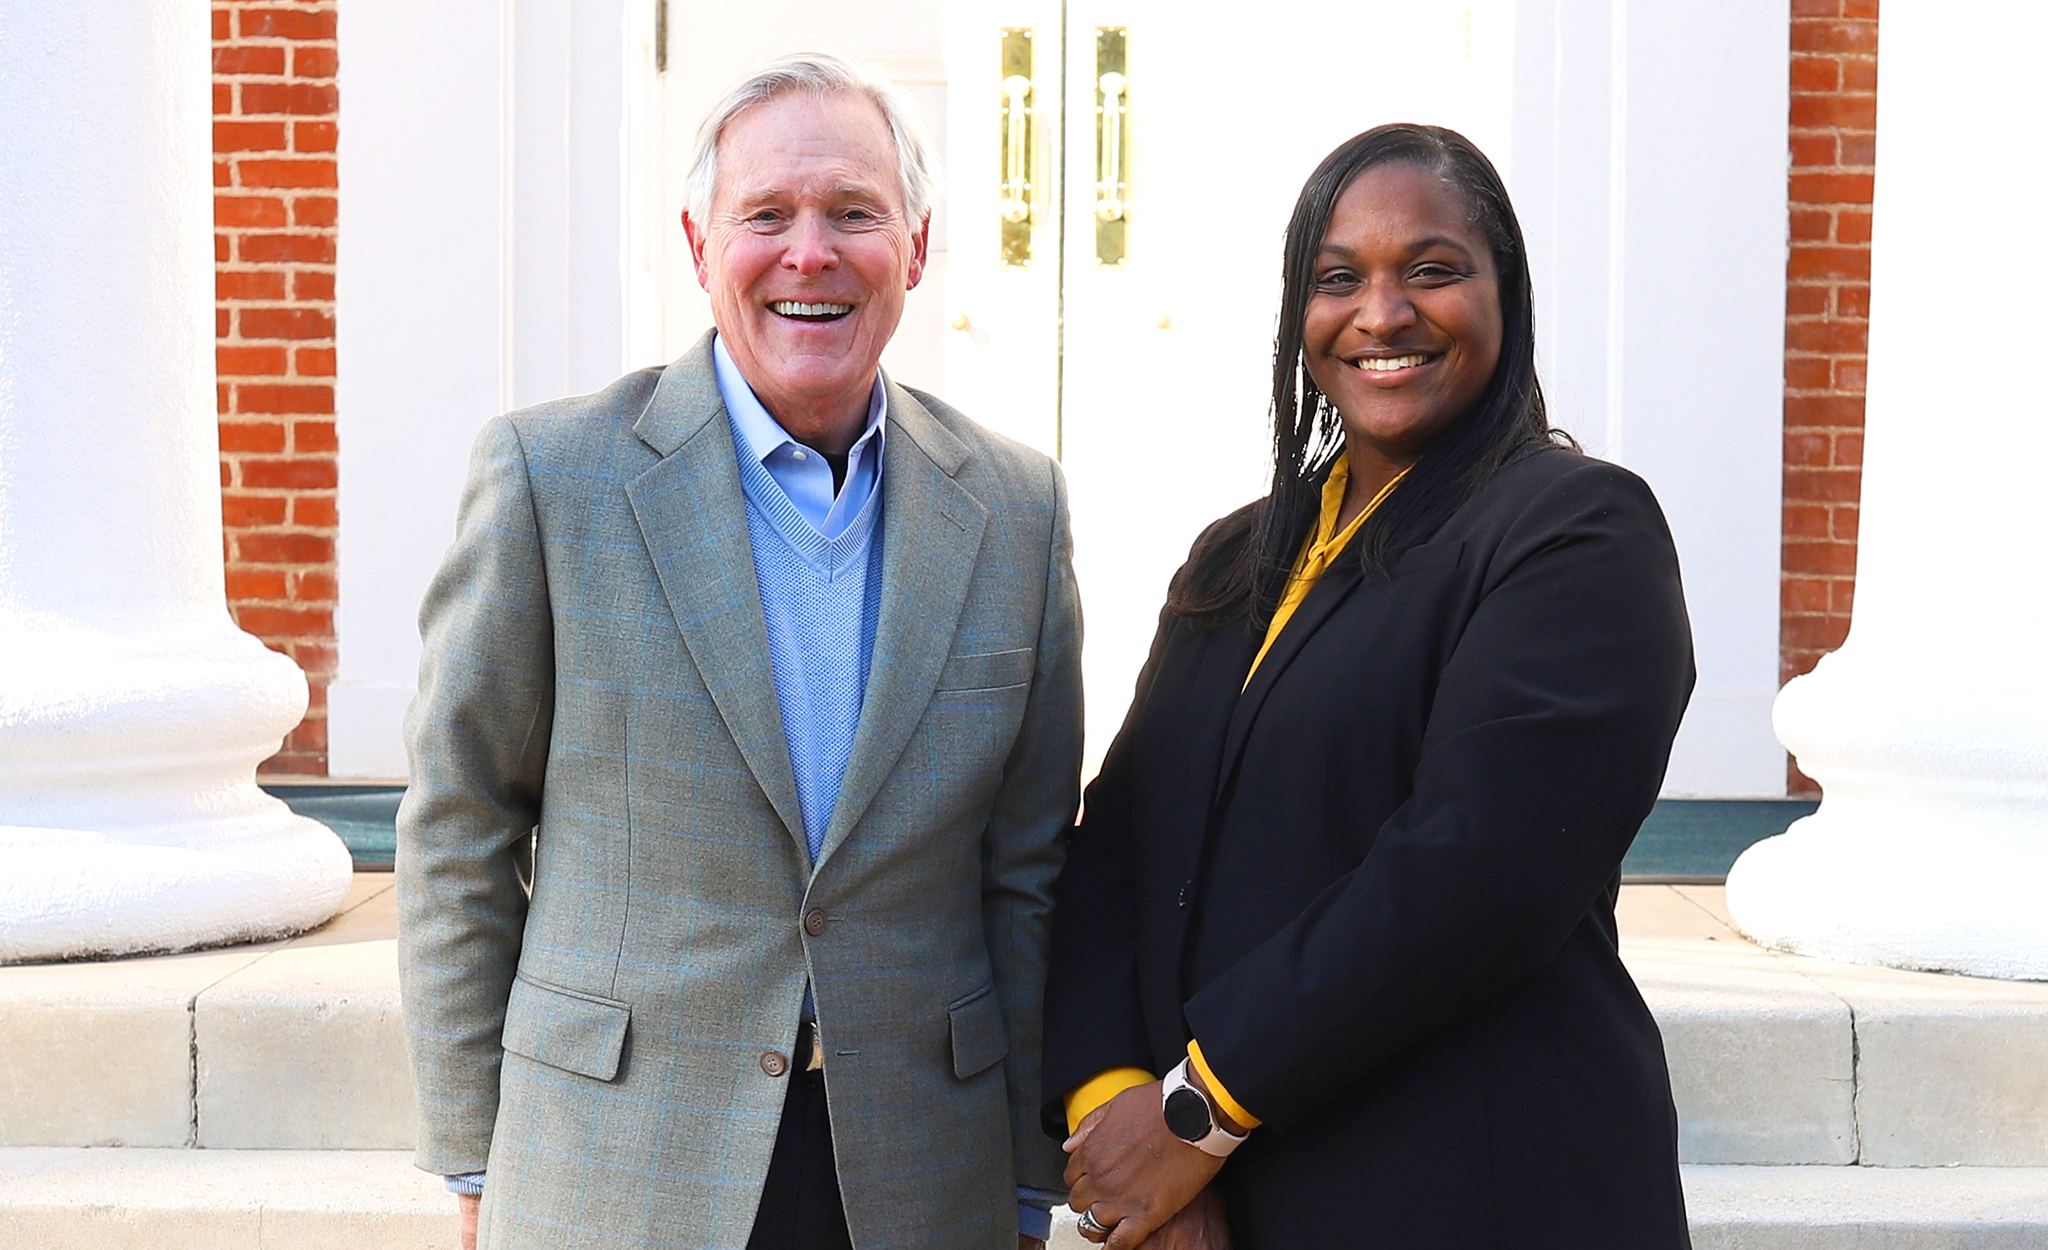 Ole Miss alumnus and former Mississippi Gov. Ray Mabus (left) visits with Shawnboda Mead, vice chancellor for diversity and community engagement. Mabus is challenging alumni and friends of the university to support the Diversity and Community Engagement Fund on Giving Day. Photo by Kirsten Simpson/University Development